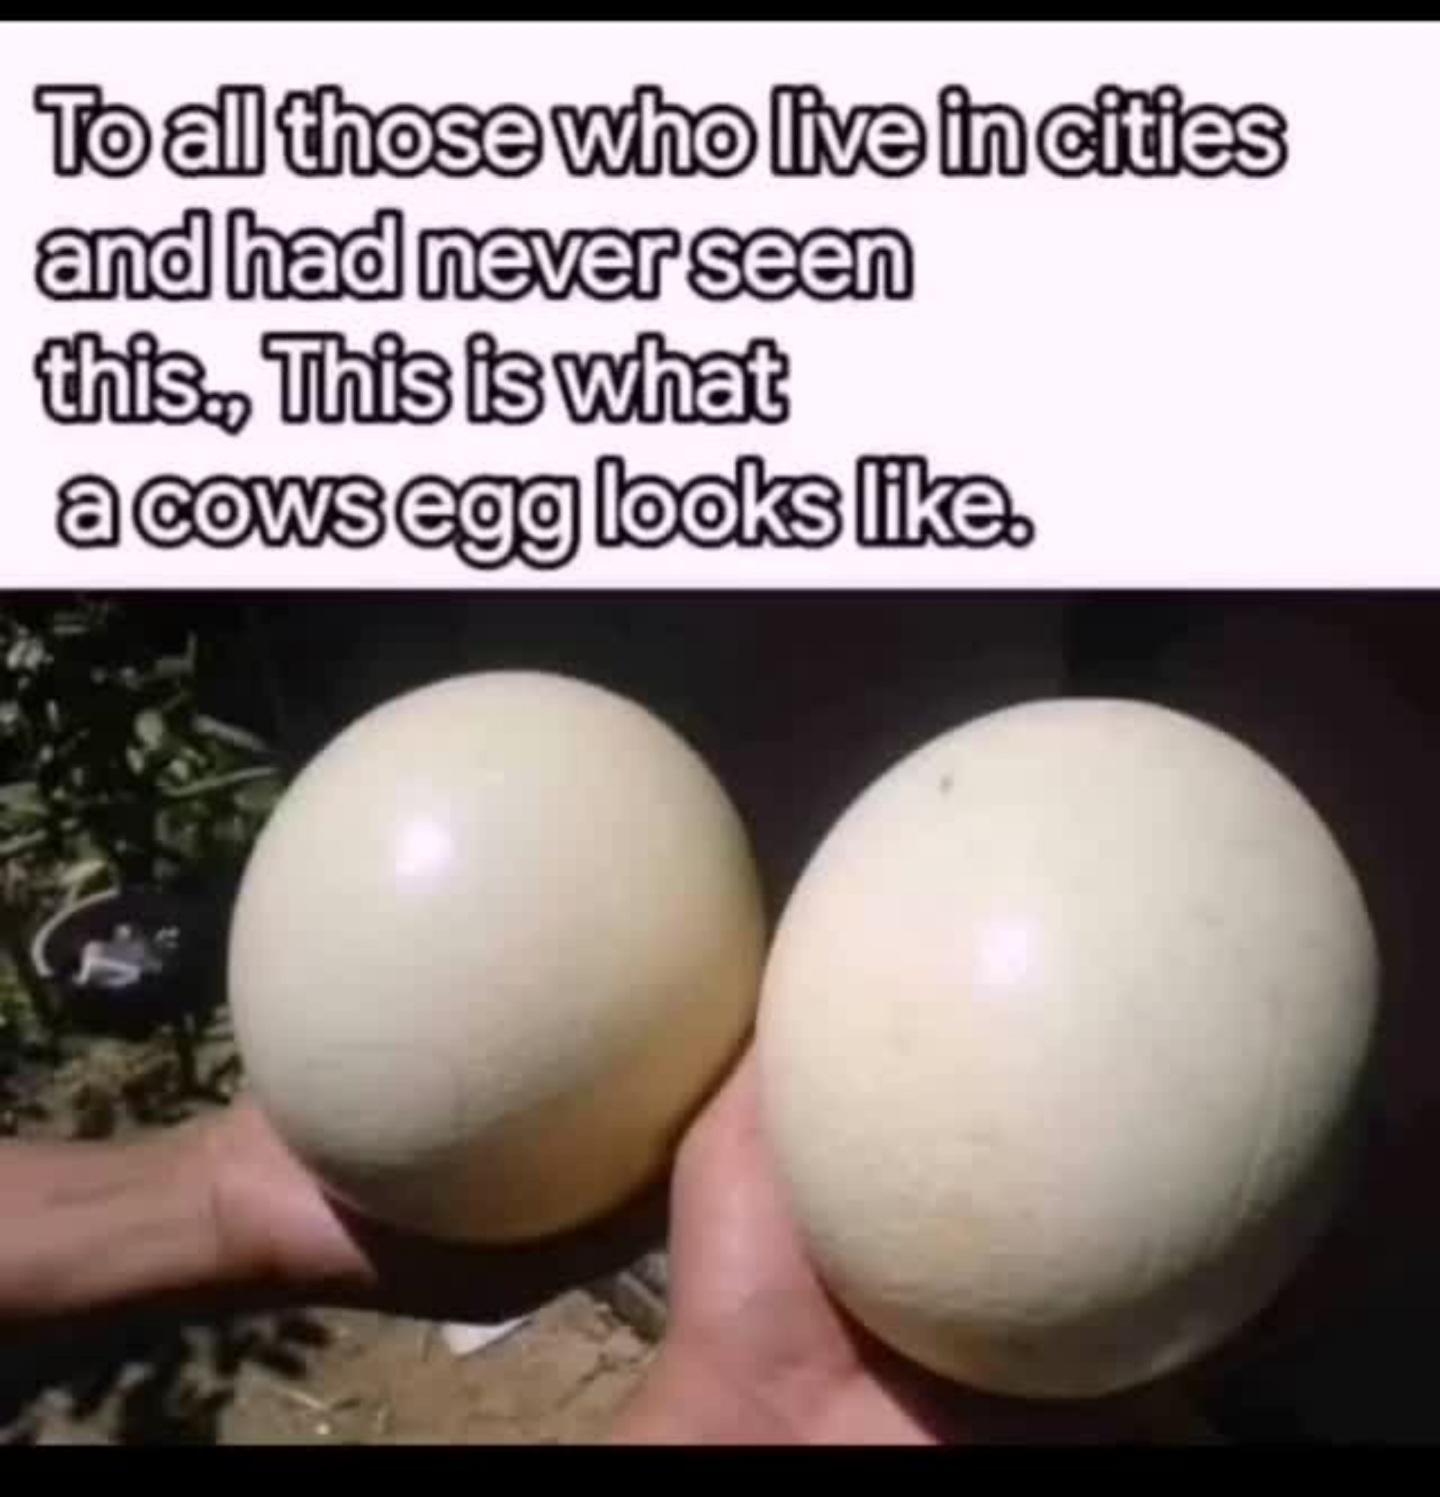 dank memes - funny memes - cow egg meme - To all those who live in cities and had never seen this. This is what a cows egg looks .